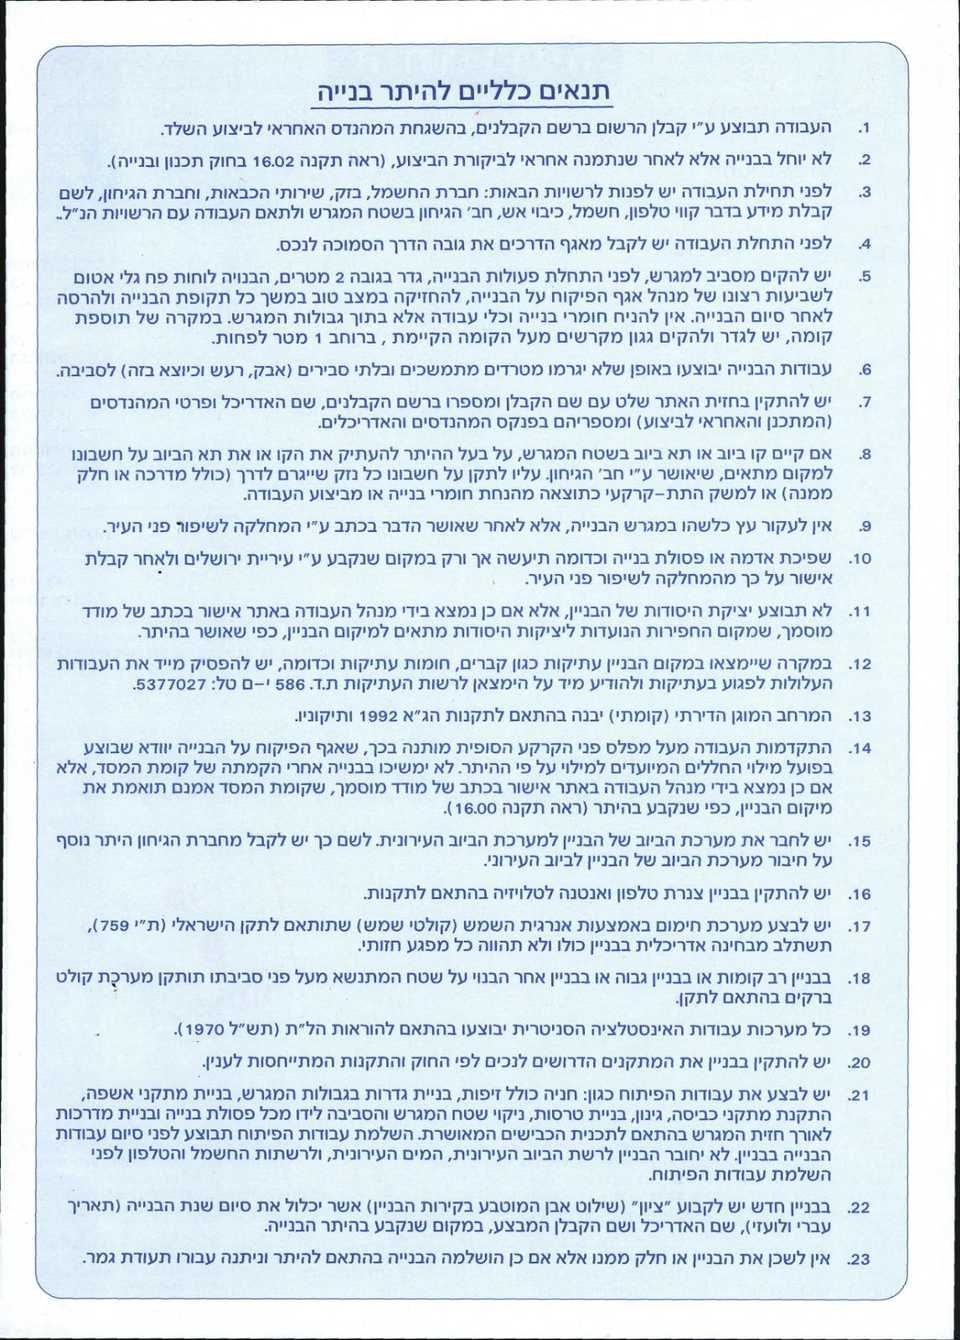 Article 22 of the licence in Hebrew gives permission to hang the plaque on the walls of the cemetery, the name of the renovator along with the date of renovation.